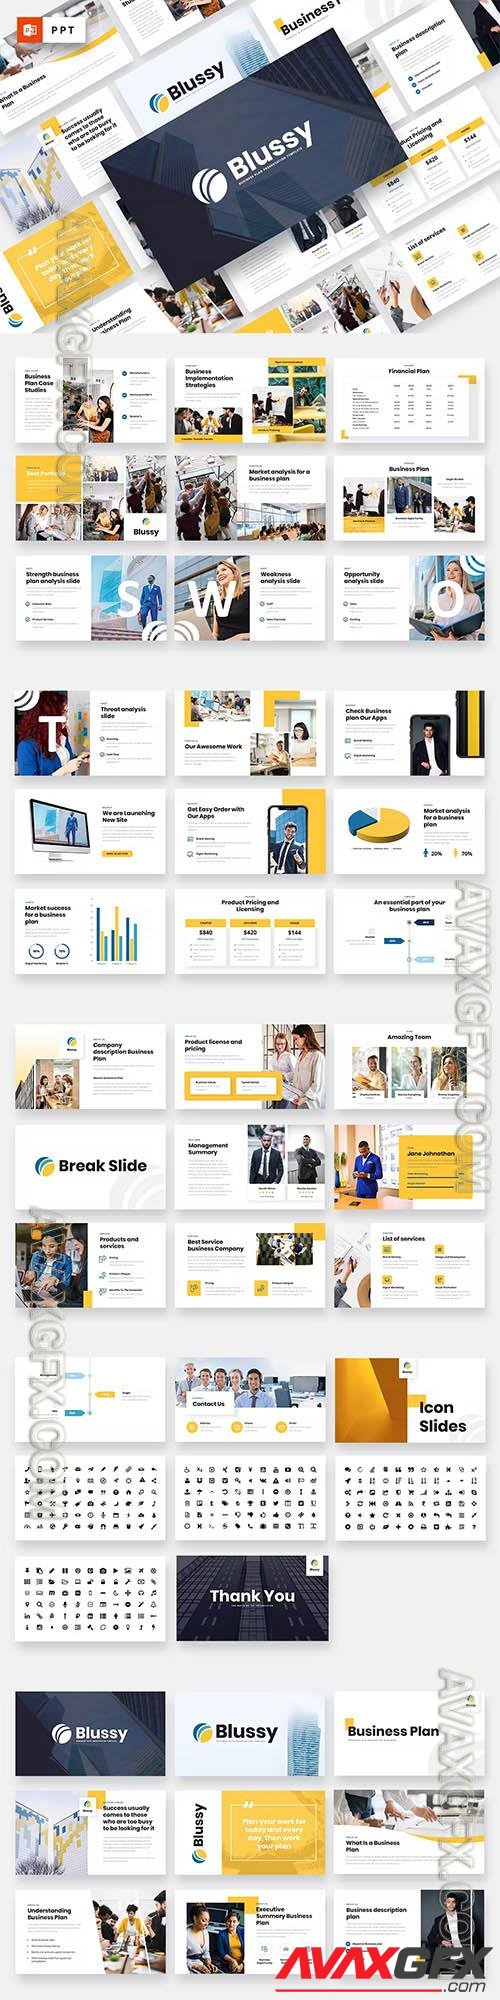 Blussy - Business Plan Powerpoint Template